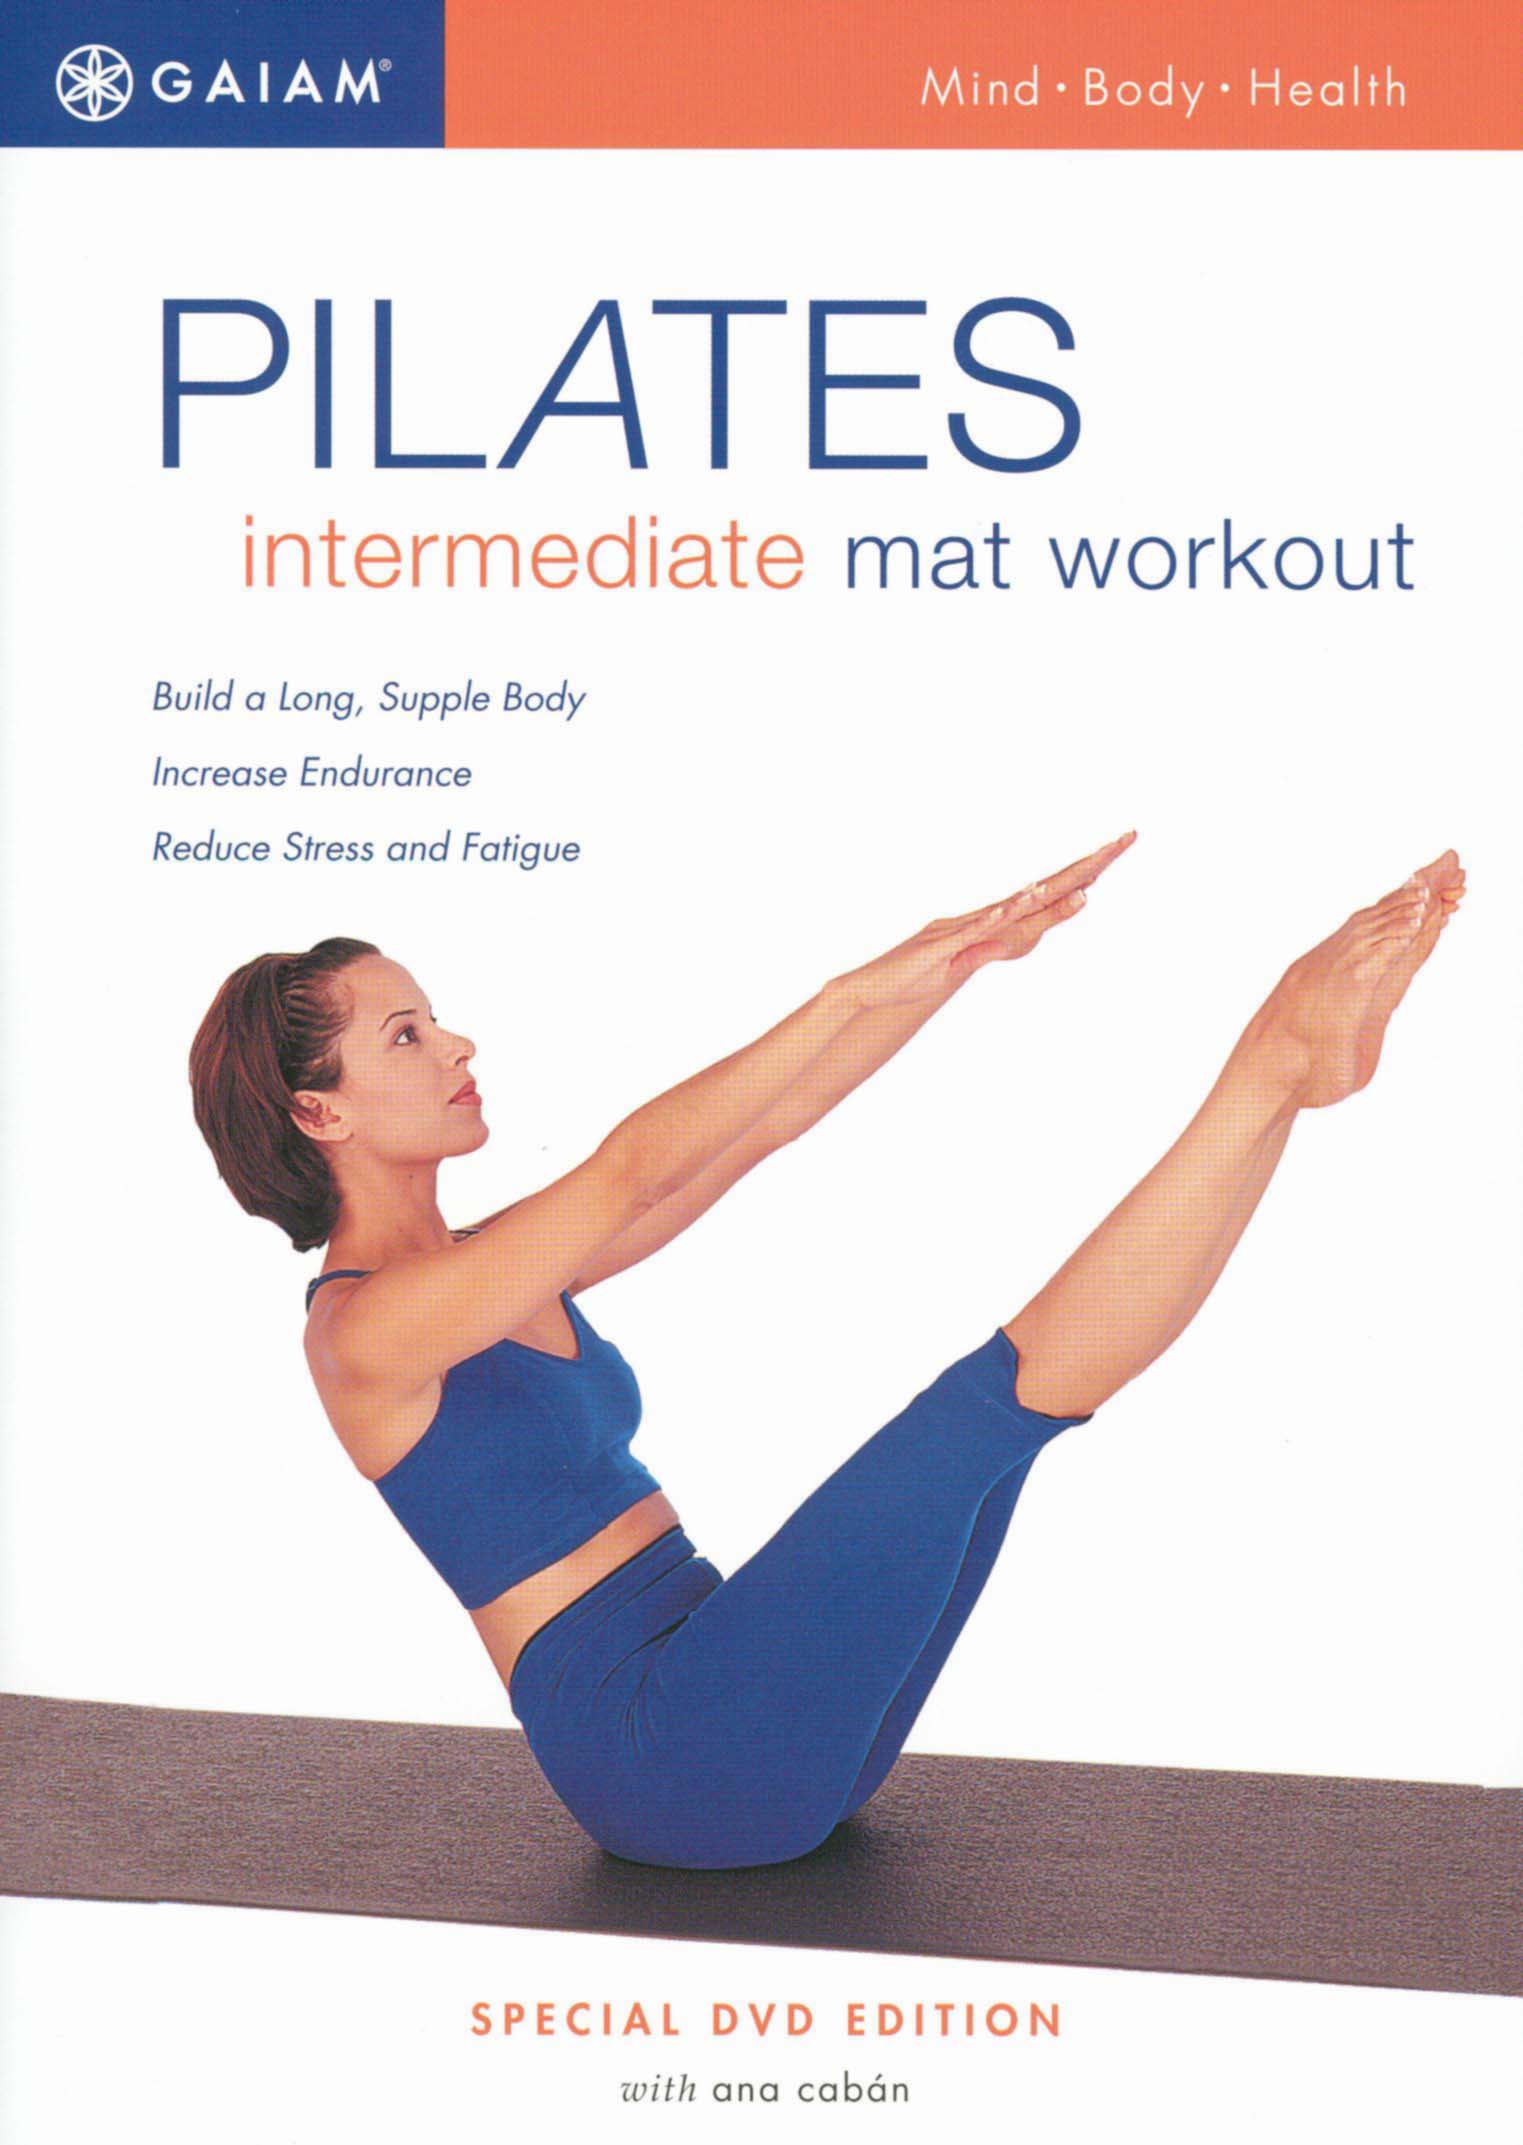 GAIAM PILATES DVDS Boxed Set of 3 Workouts Powerhouse Collection